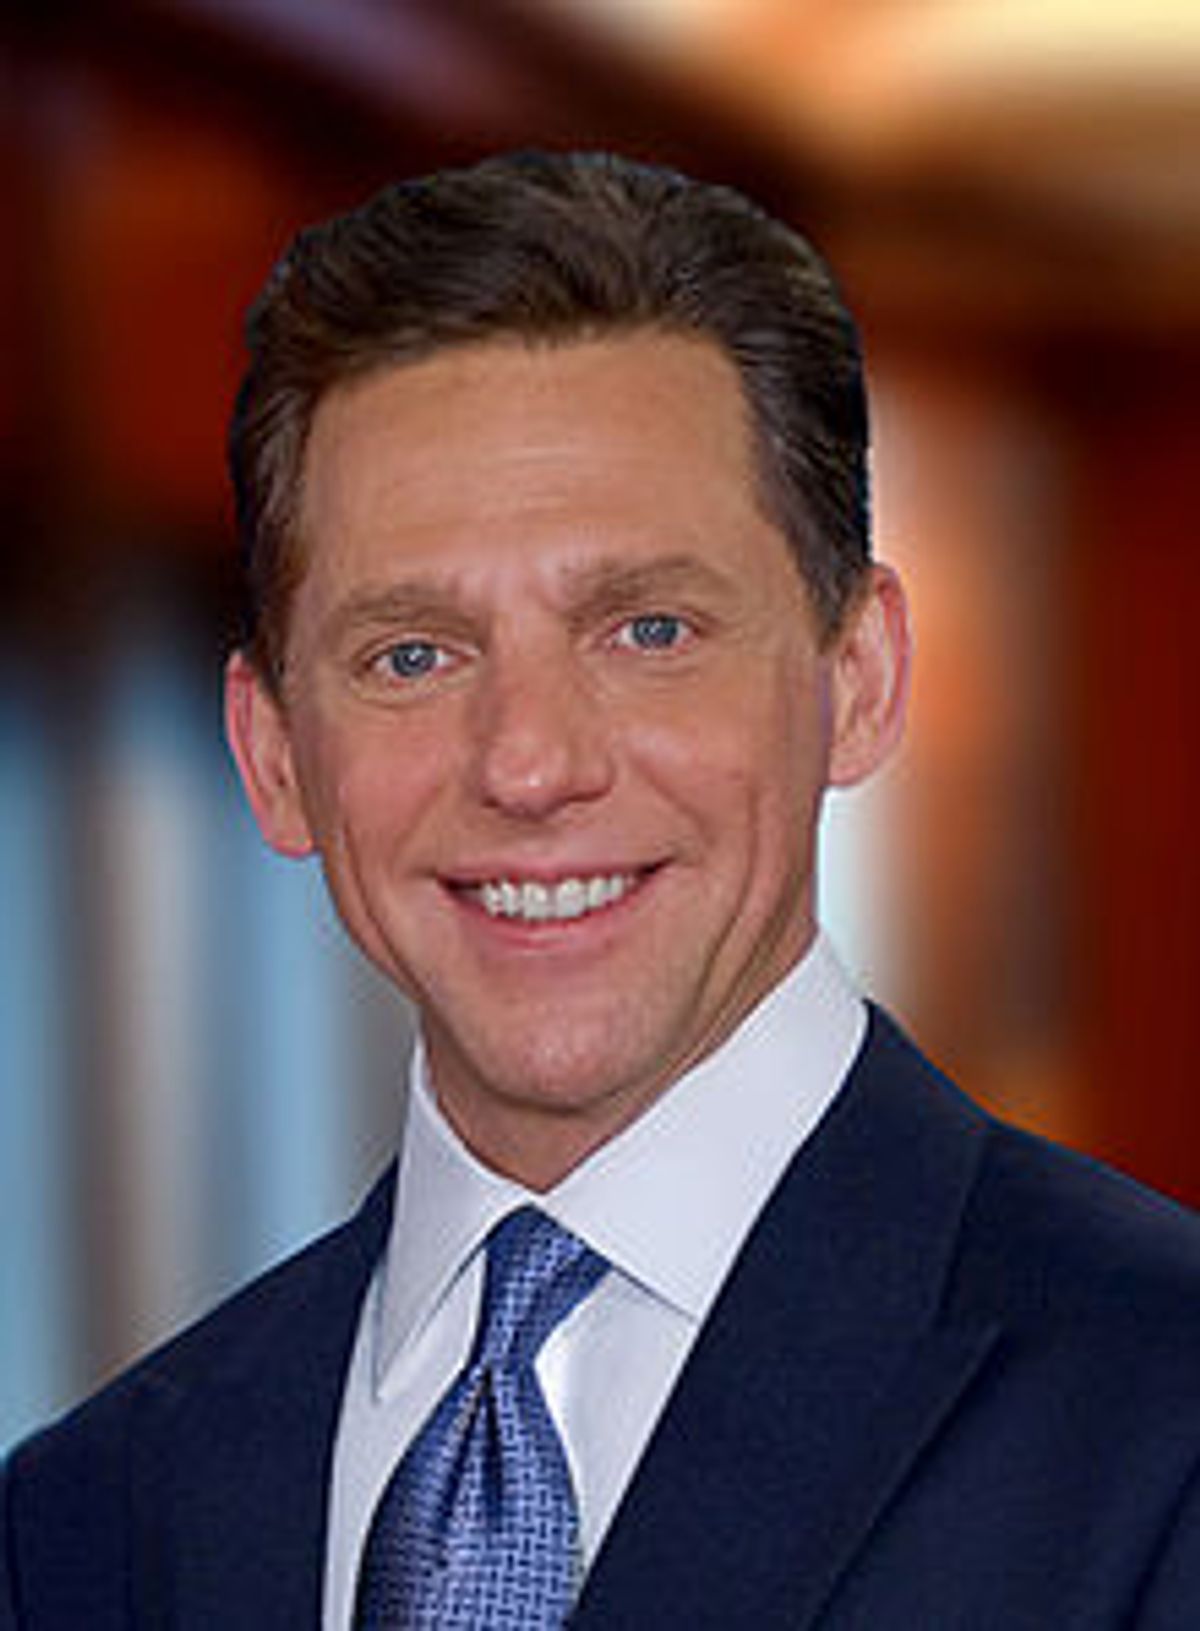  The Church of Scientology's David Miscavige     (Wikipedia)